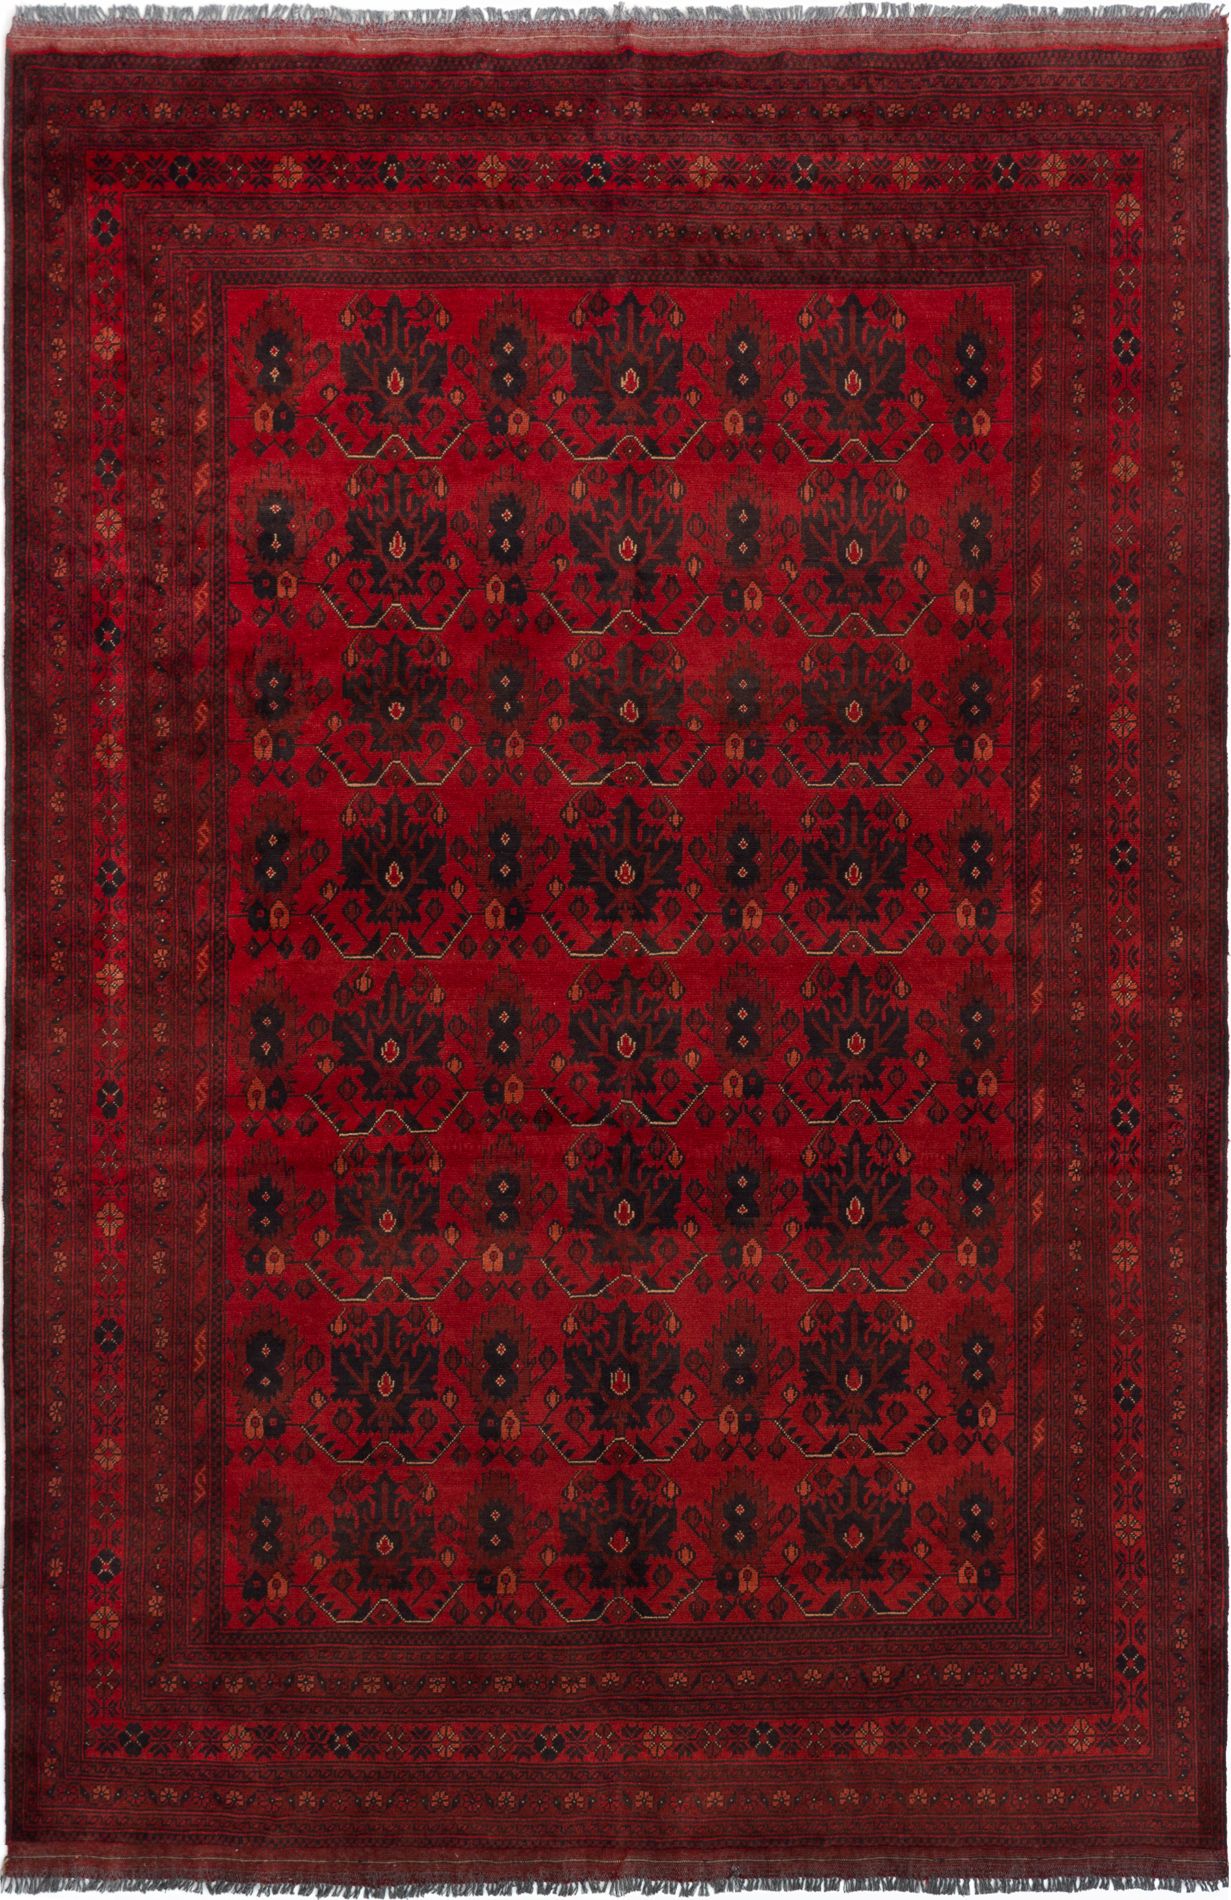 Hand-knotted Finest Khal Mohammadi Red Wool Rug 6'6" x 9'8"  Size: 6'6" x 9'8"  